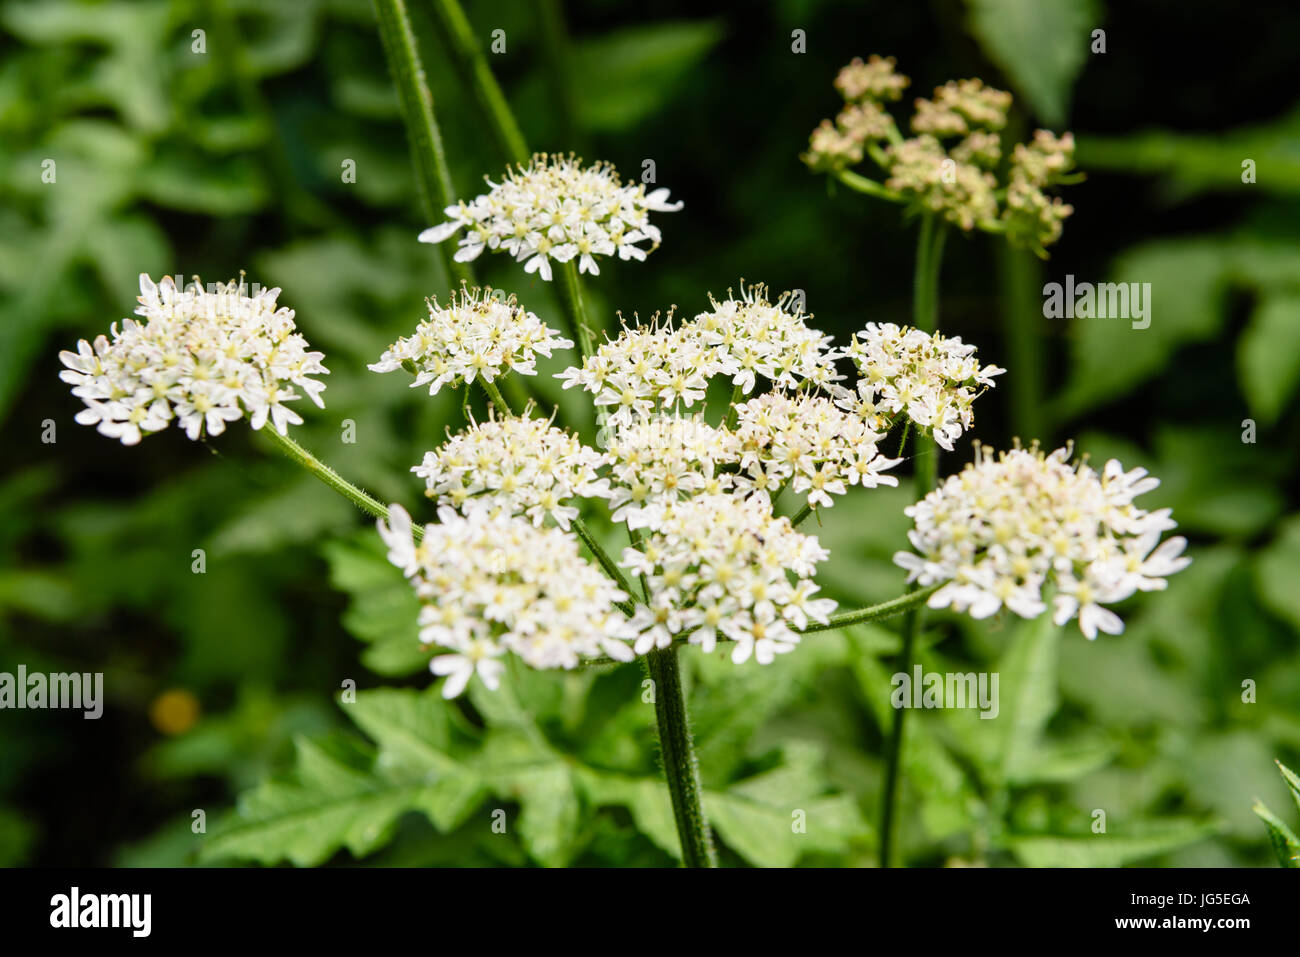 Flowers of a cow parsley plant in a field.   It is often mistaken for the highly poisonous toxic giant hogweed. Stock Photo